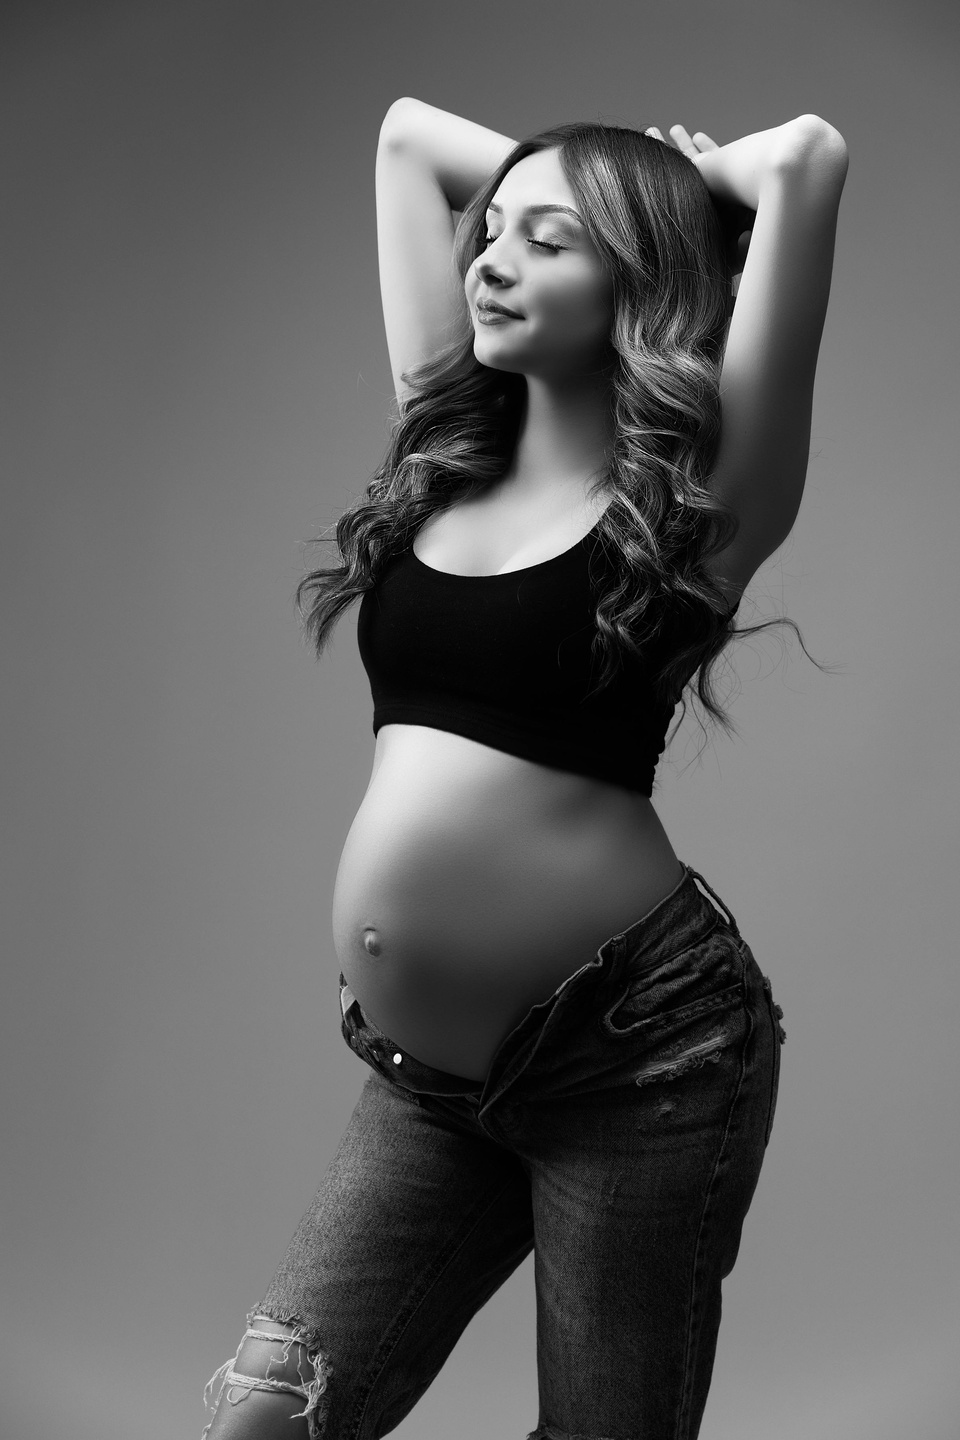 elegant mother with open jeans and a black top exposing her pregnancy belly in a high fashion pose. this portrait was edited in black and white for a timeless luxury look Clavin Klein inspired photography by the best studio photography 